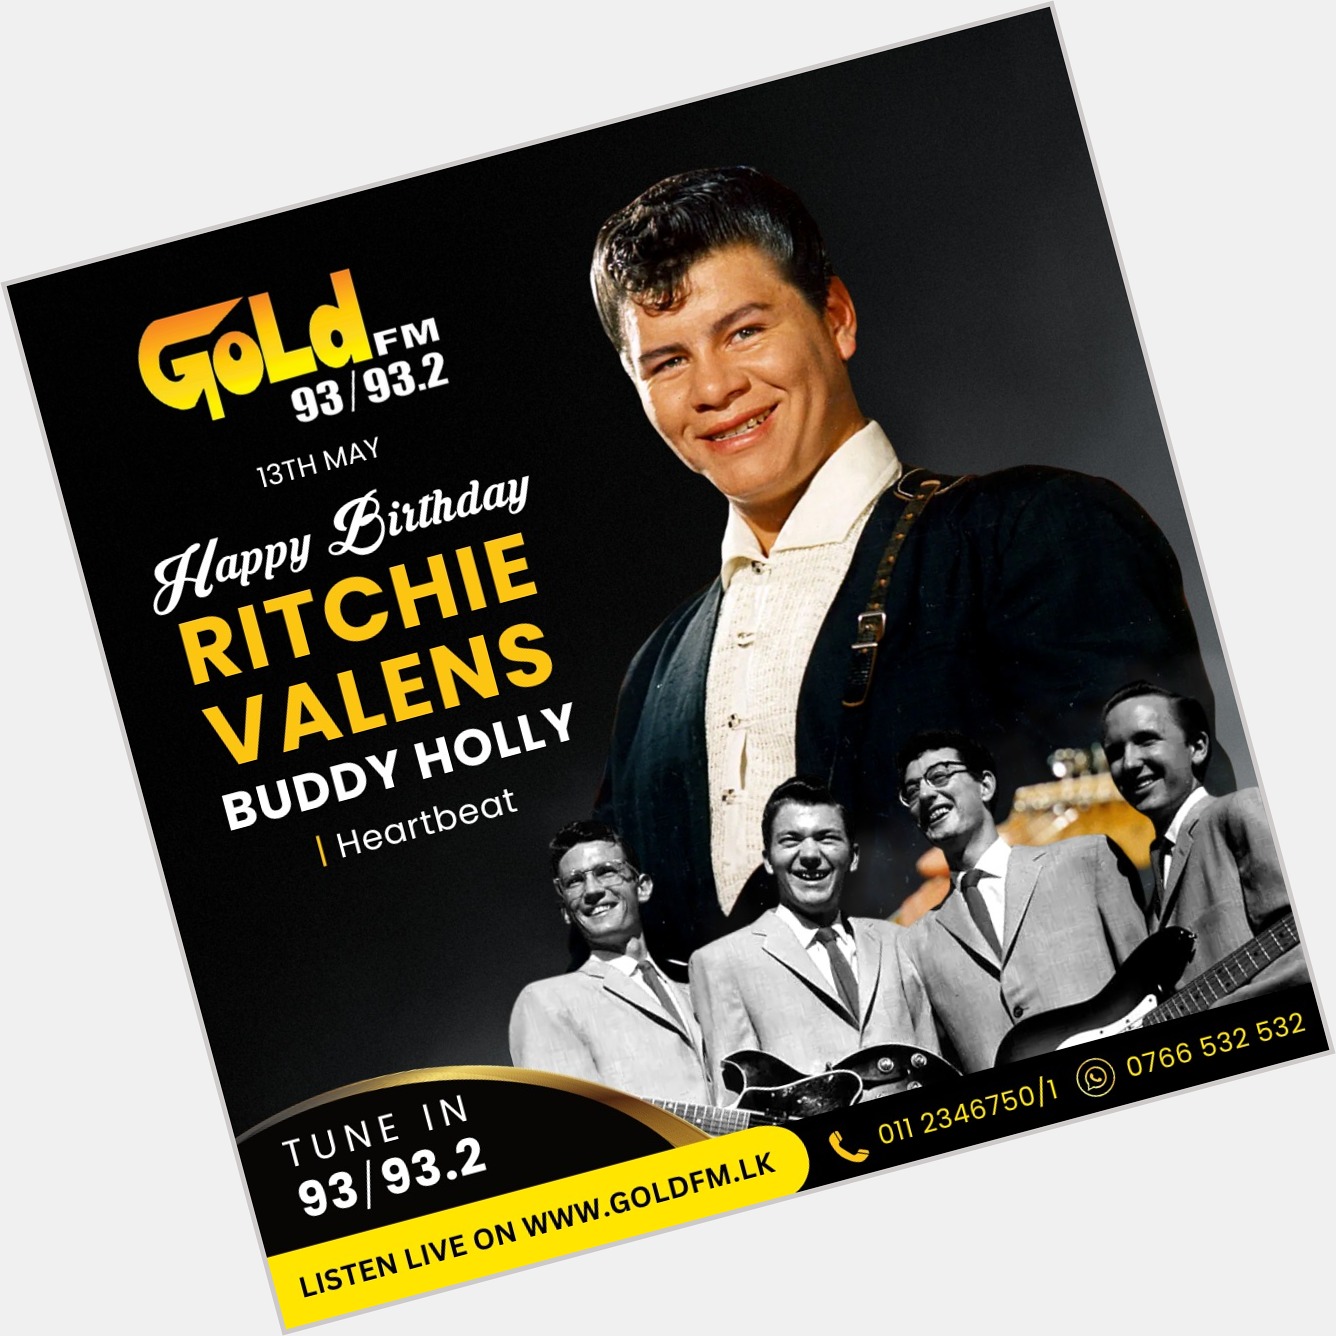 HAPPY BIRTHDAY TO RITCHIE VALENS TUNE IN NOW 93 / 93.2 Island wide     